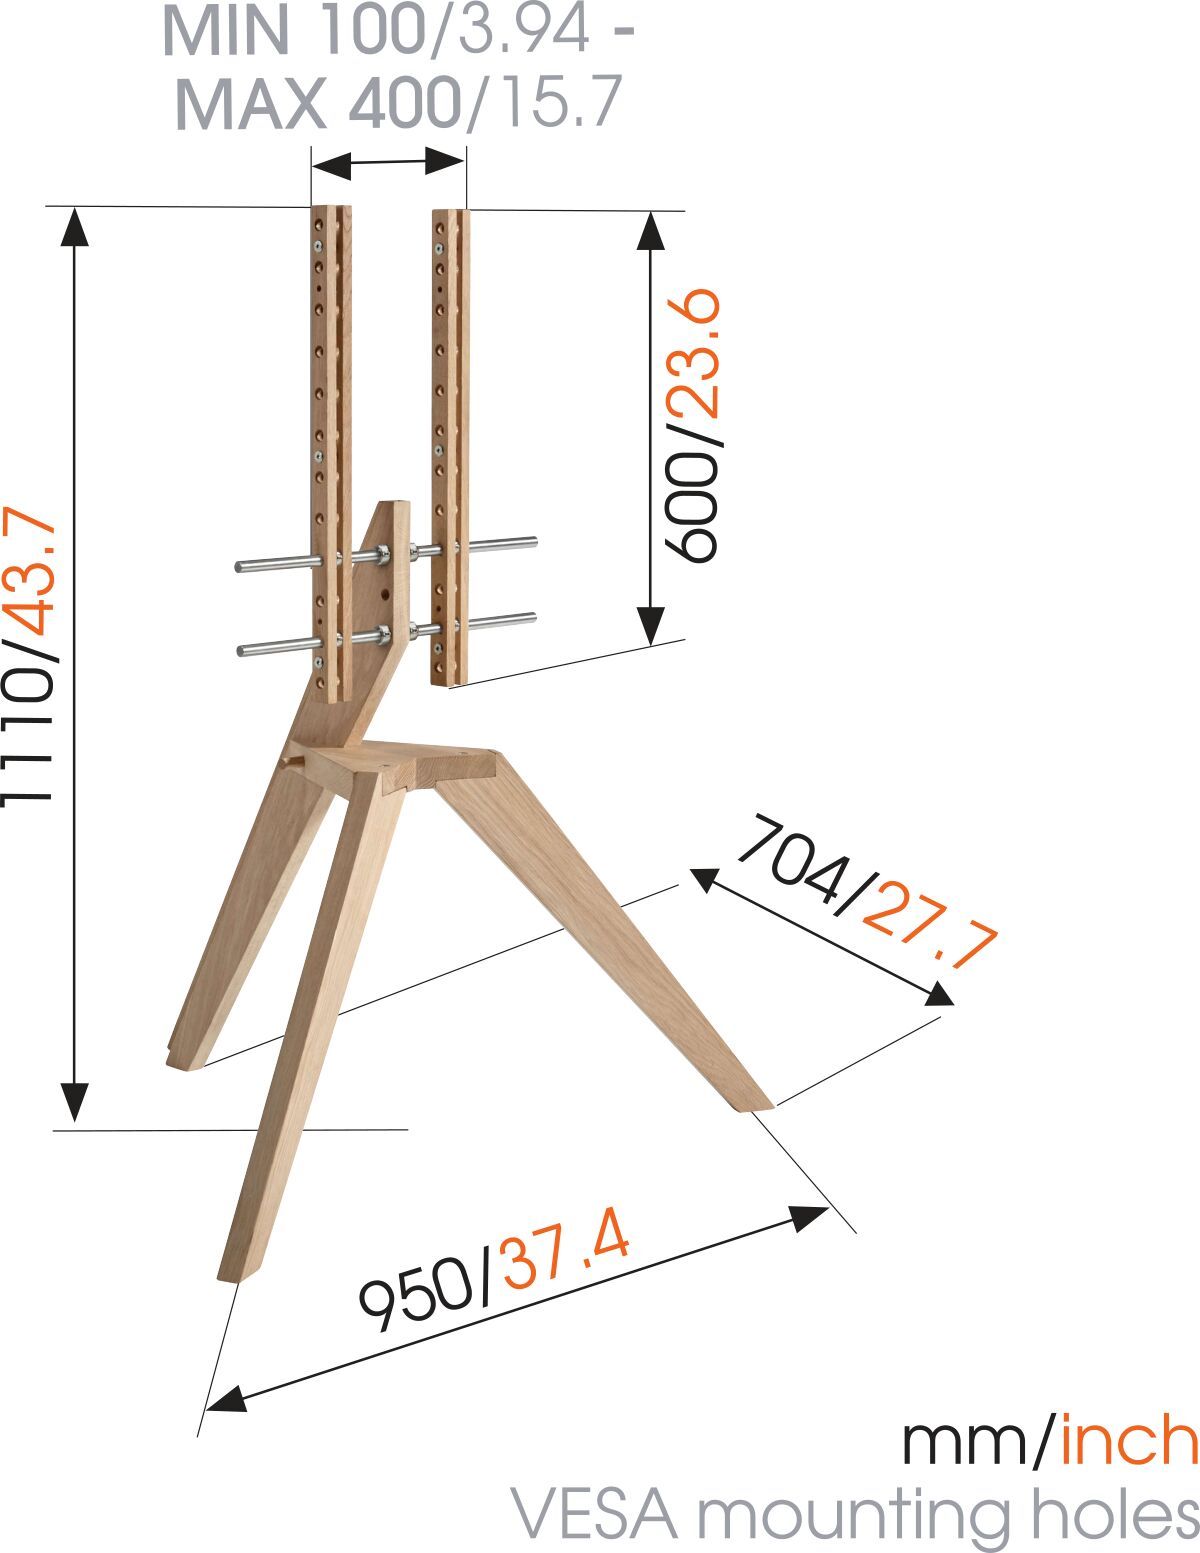 Vogel's NEXT OP1 TV Floor Stand - Suitable for 46 up to 70 inch TVs up to Light oak - Dimensions